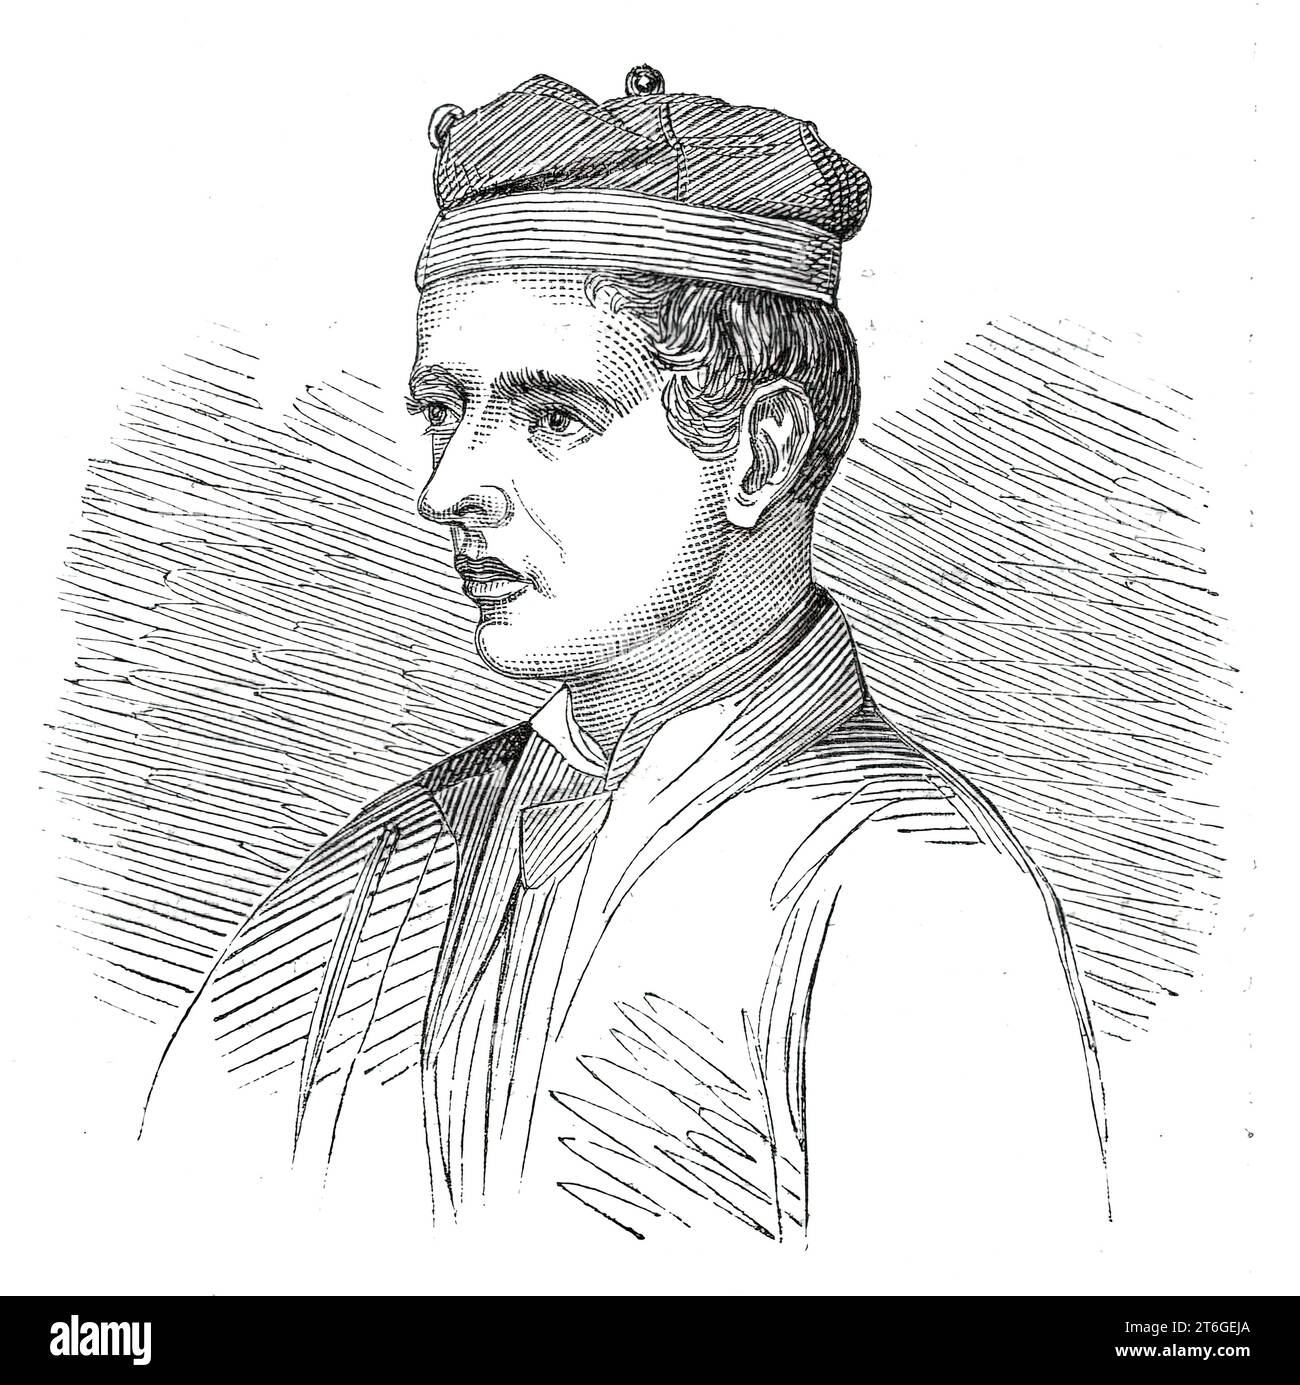 Peter Cunningham, of the English Battalion, 1860. British military fighting in Italy, as part of a '...battalion composed of North Italians and Palermitans...under the command of Lieutenant-Colonel Dunne and several other English officers...Peter Cunningham, a young English sailor...asked Colonel Windham to pitch him over the vineyard-wall behind which the Neapolitan riflemen were intrenched. The wall was seven feet in height, and he fell amongst the enemy like a bombshell, and with nearly the same effect, for they scampered off right and left, startled at seeing the youngster come plump among Stock Photo